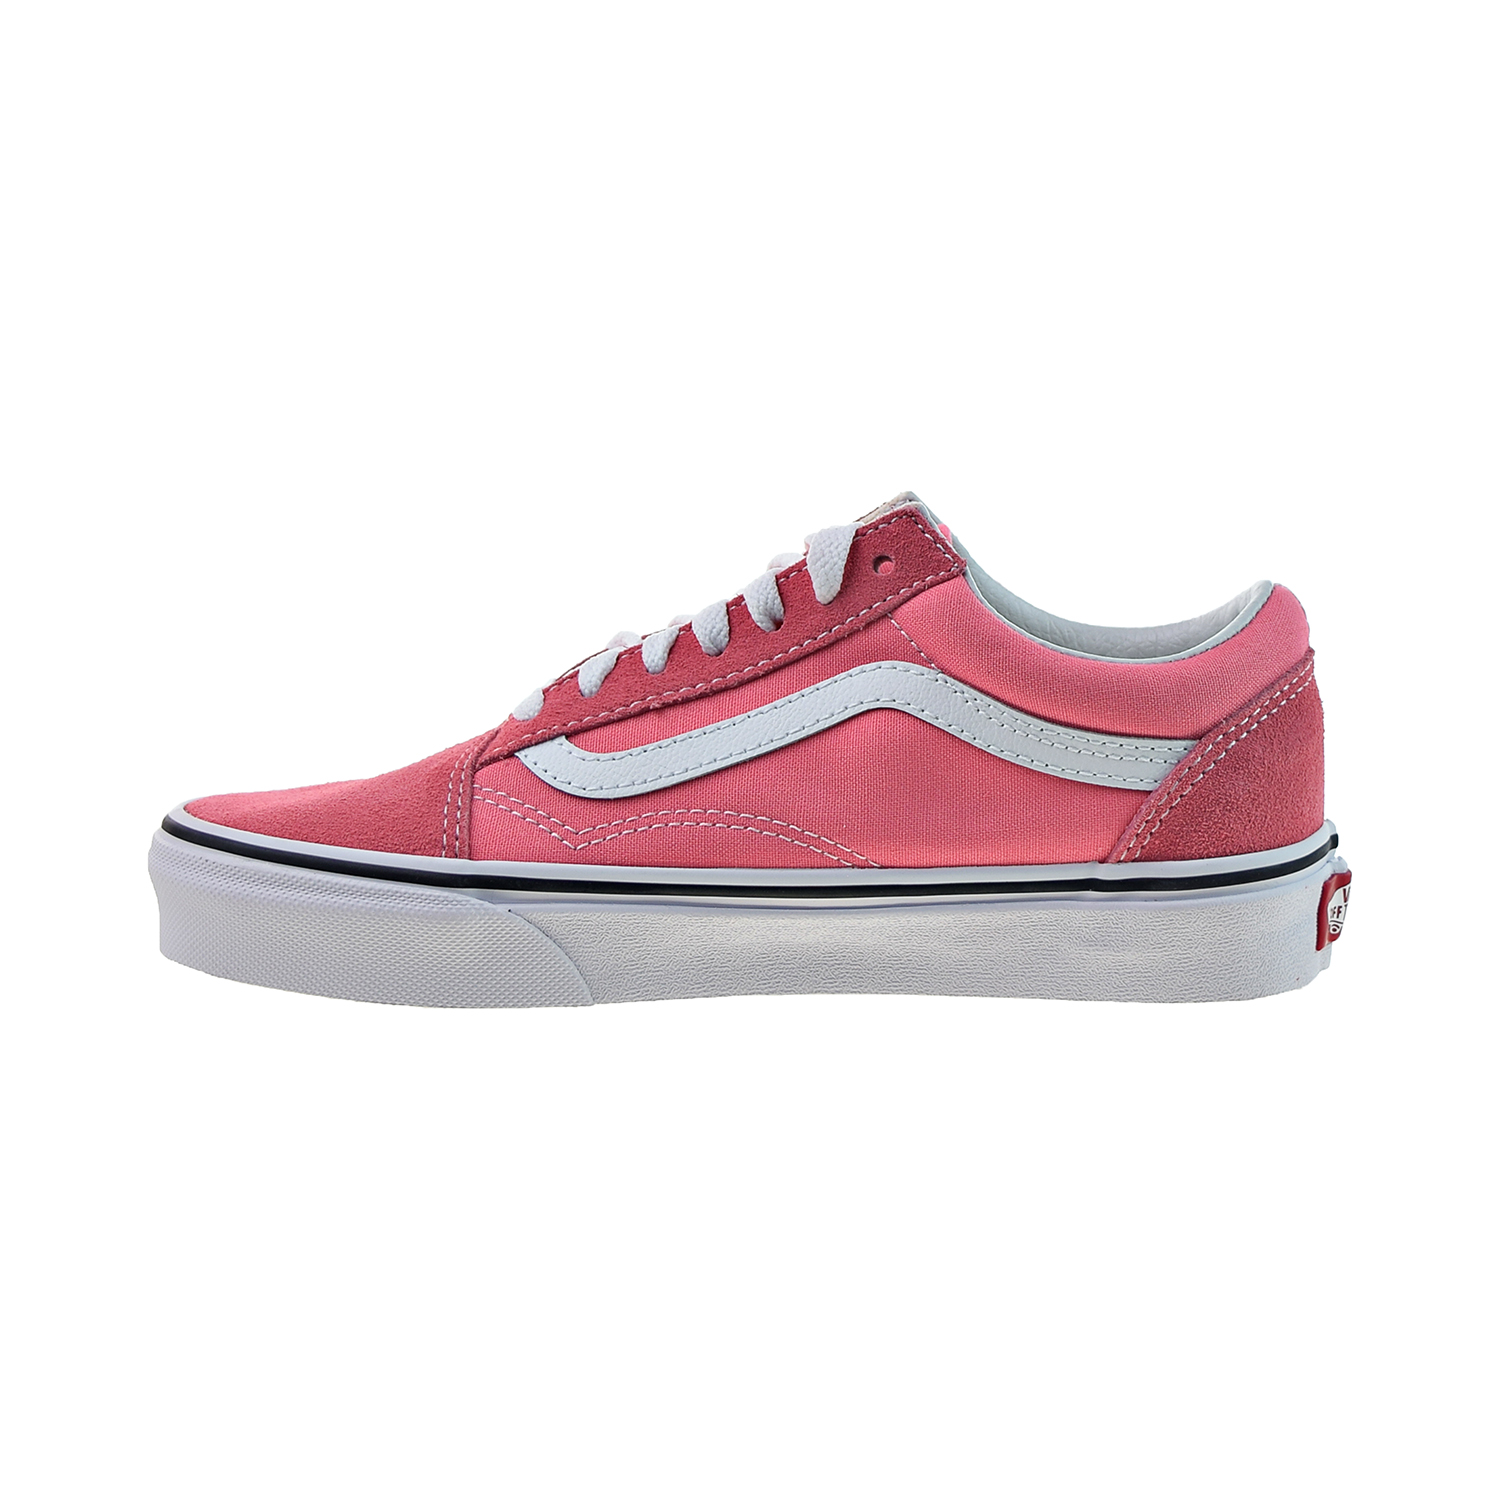 Vans Old Skool Men's Shoes Strawberry Pink-True White vn0a38g1-gy7